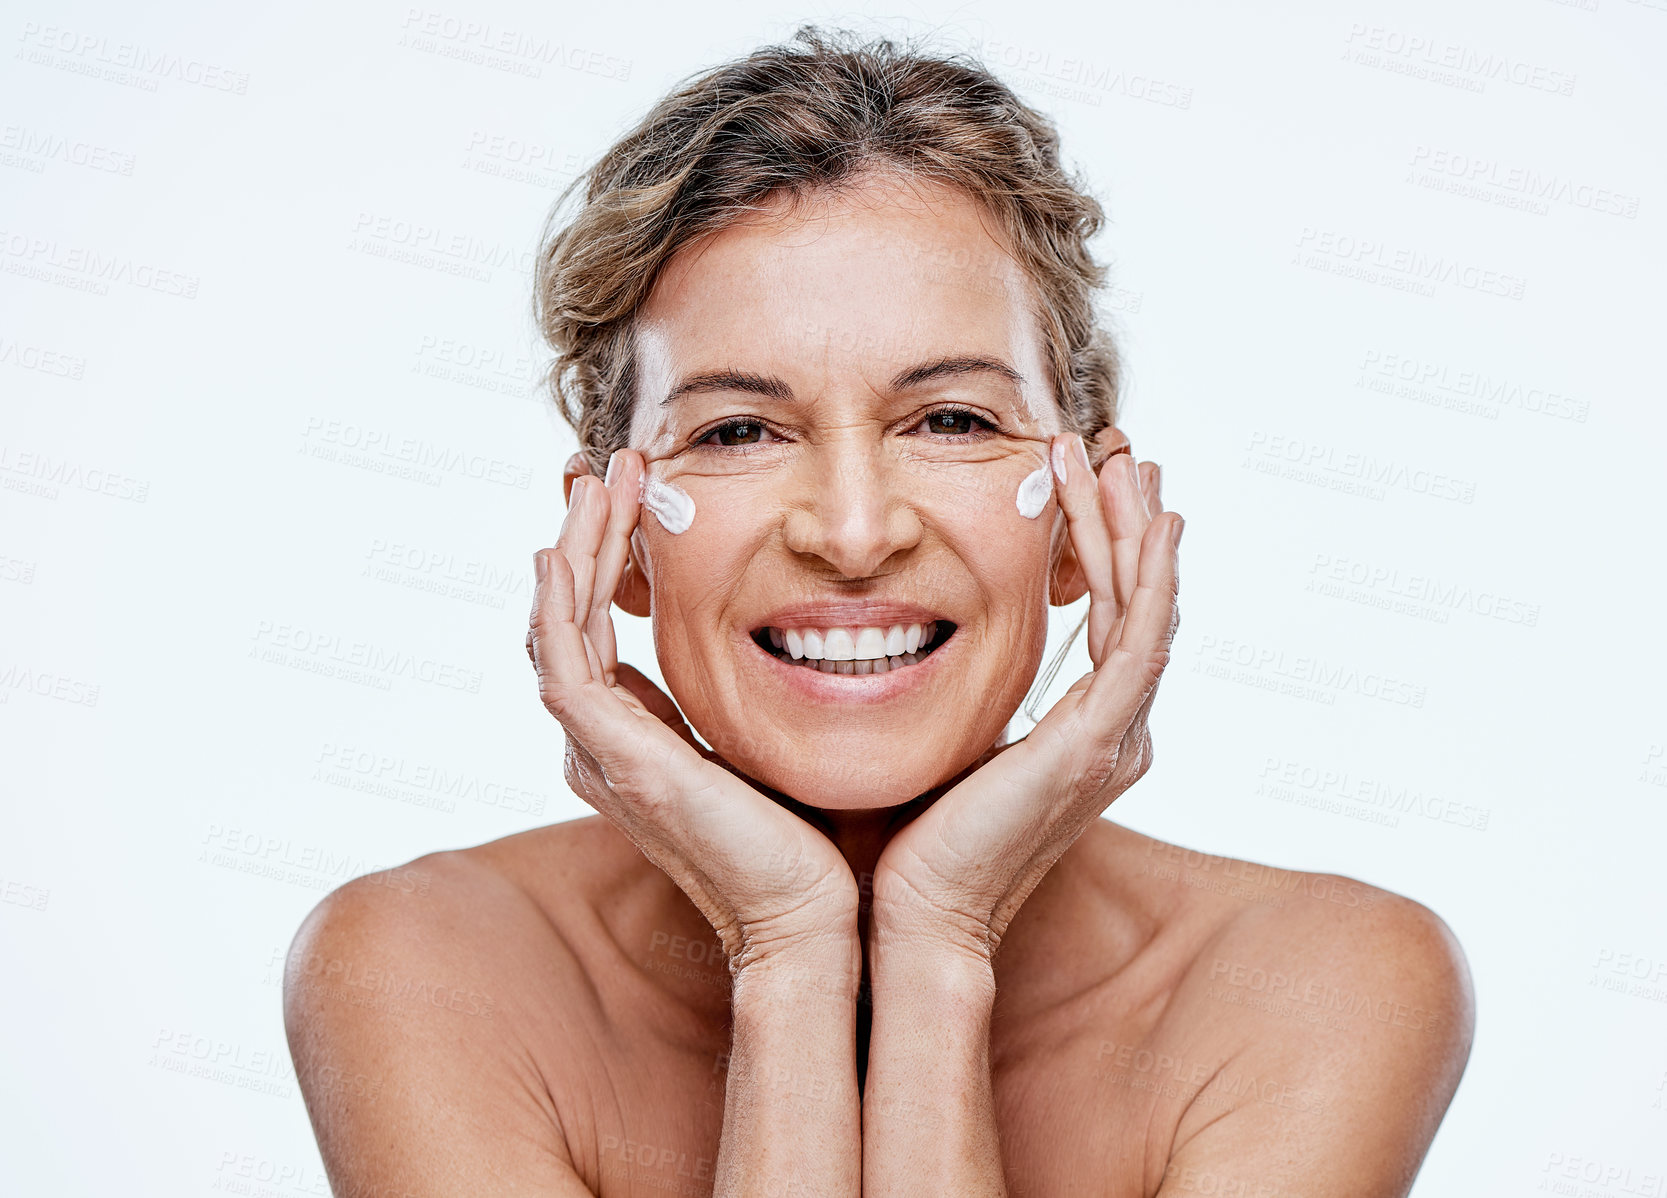 Buy stock photo Shot of a mature woman posing with moisturiser on her face